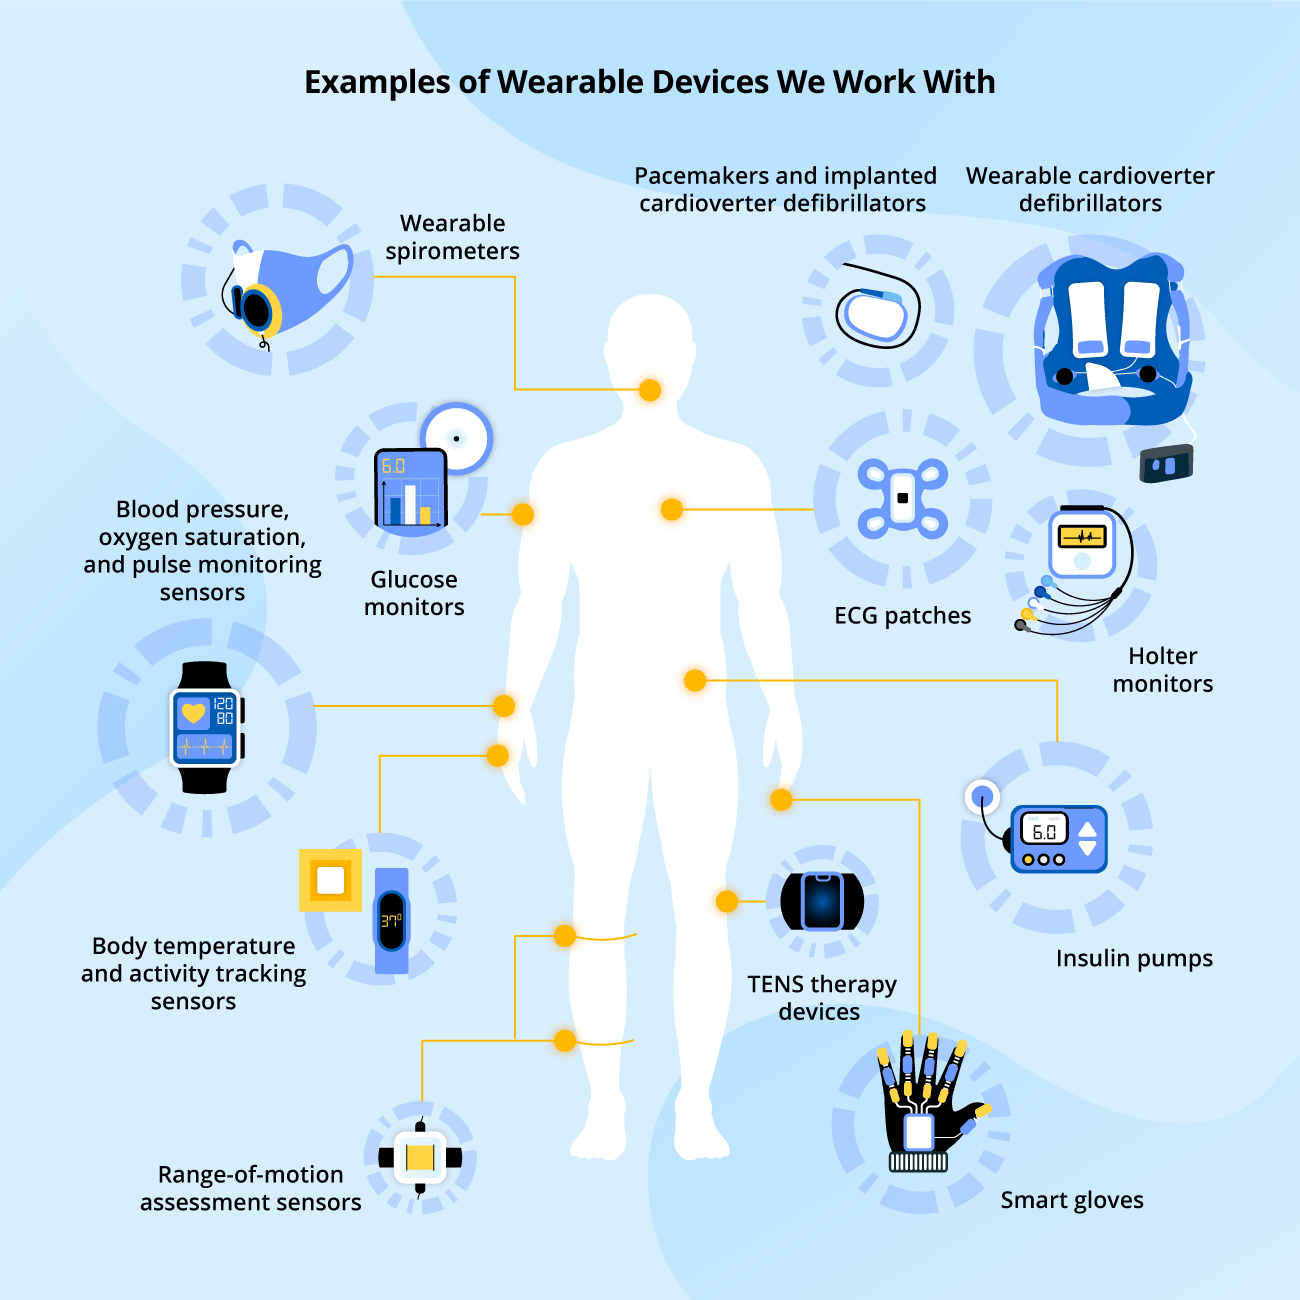 https://www.scnsoft.com/healthcare/wearables/examples-wearable-medical-devices_diagram.png